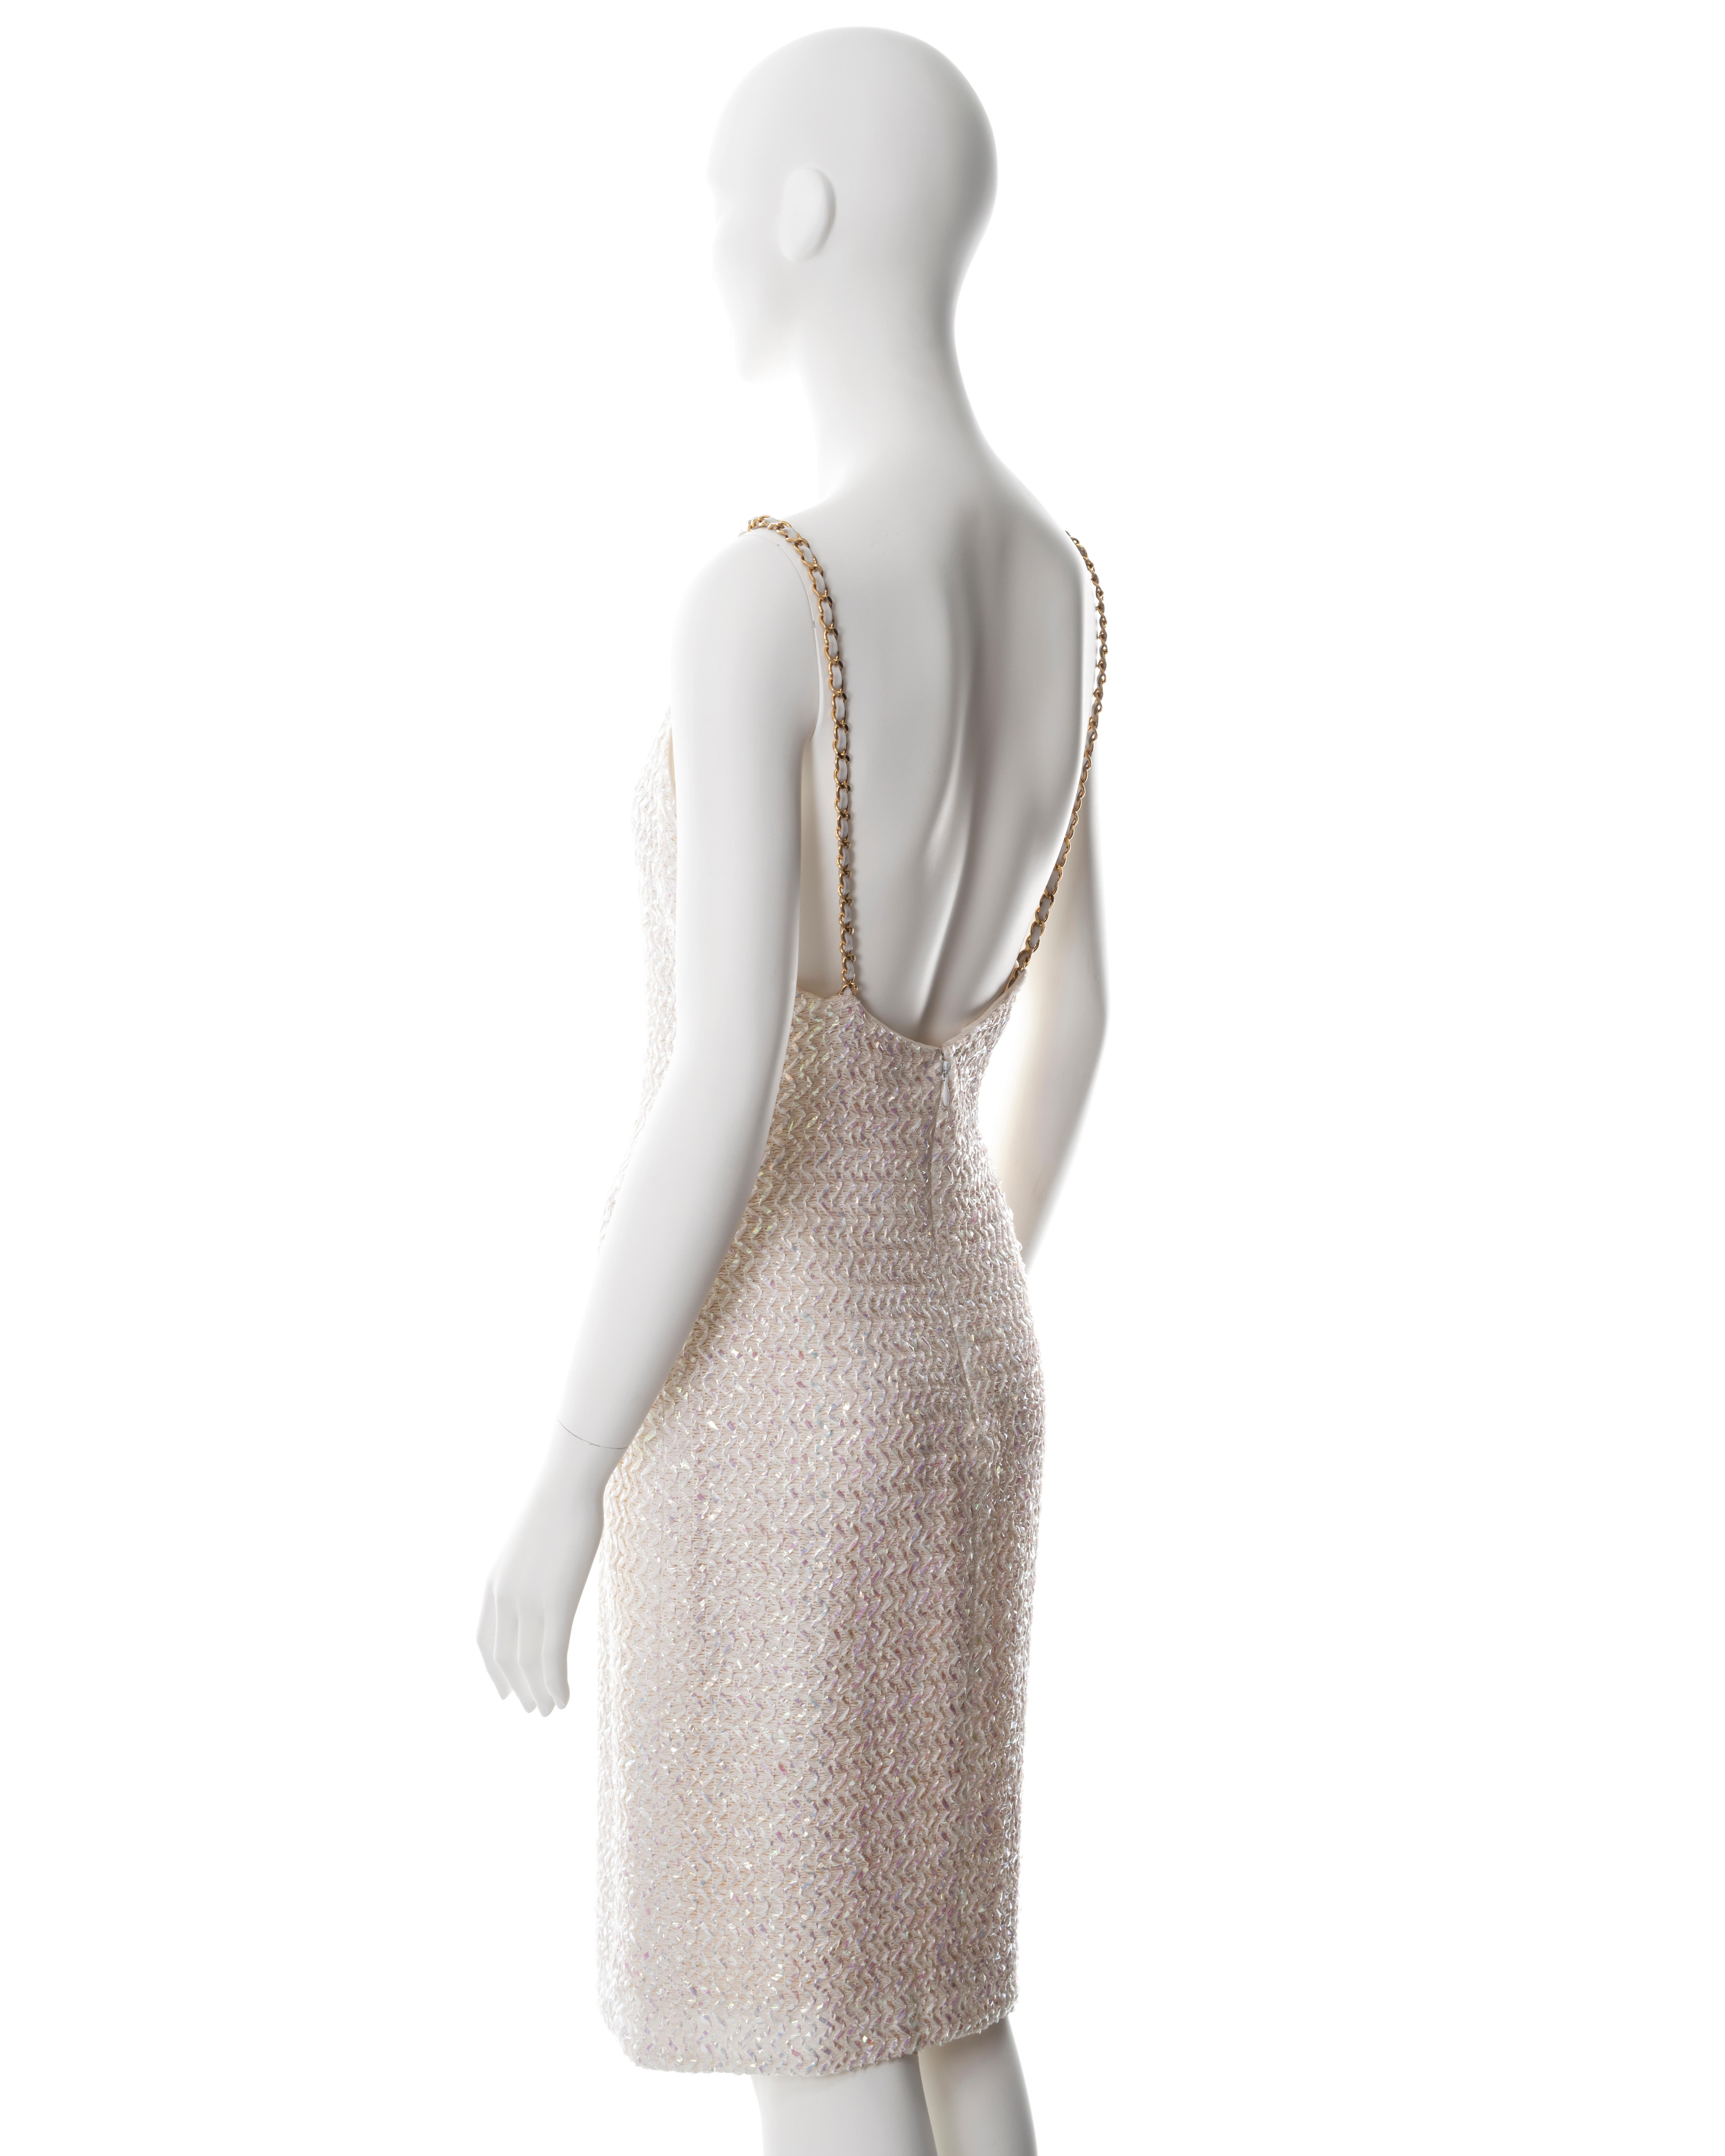 Chanel by Karl Lagerfeld white tweed sheath dress with chain straps, ss 1992 1